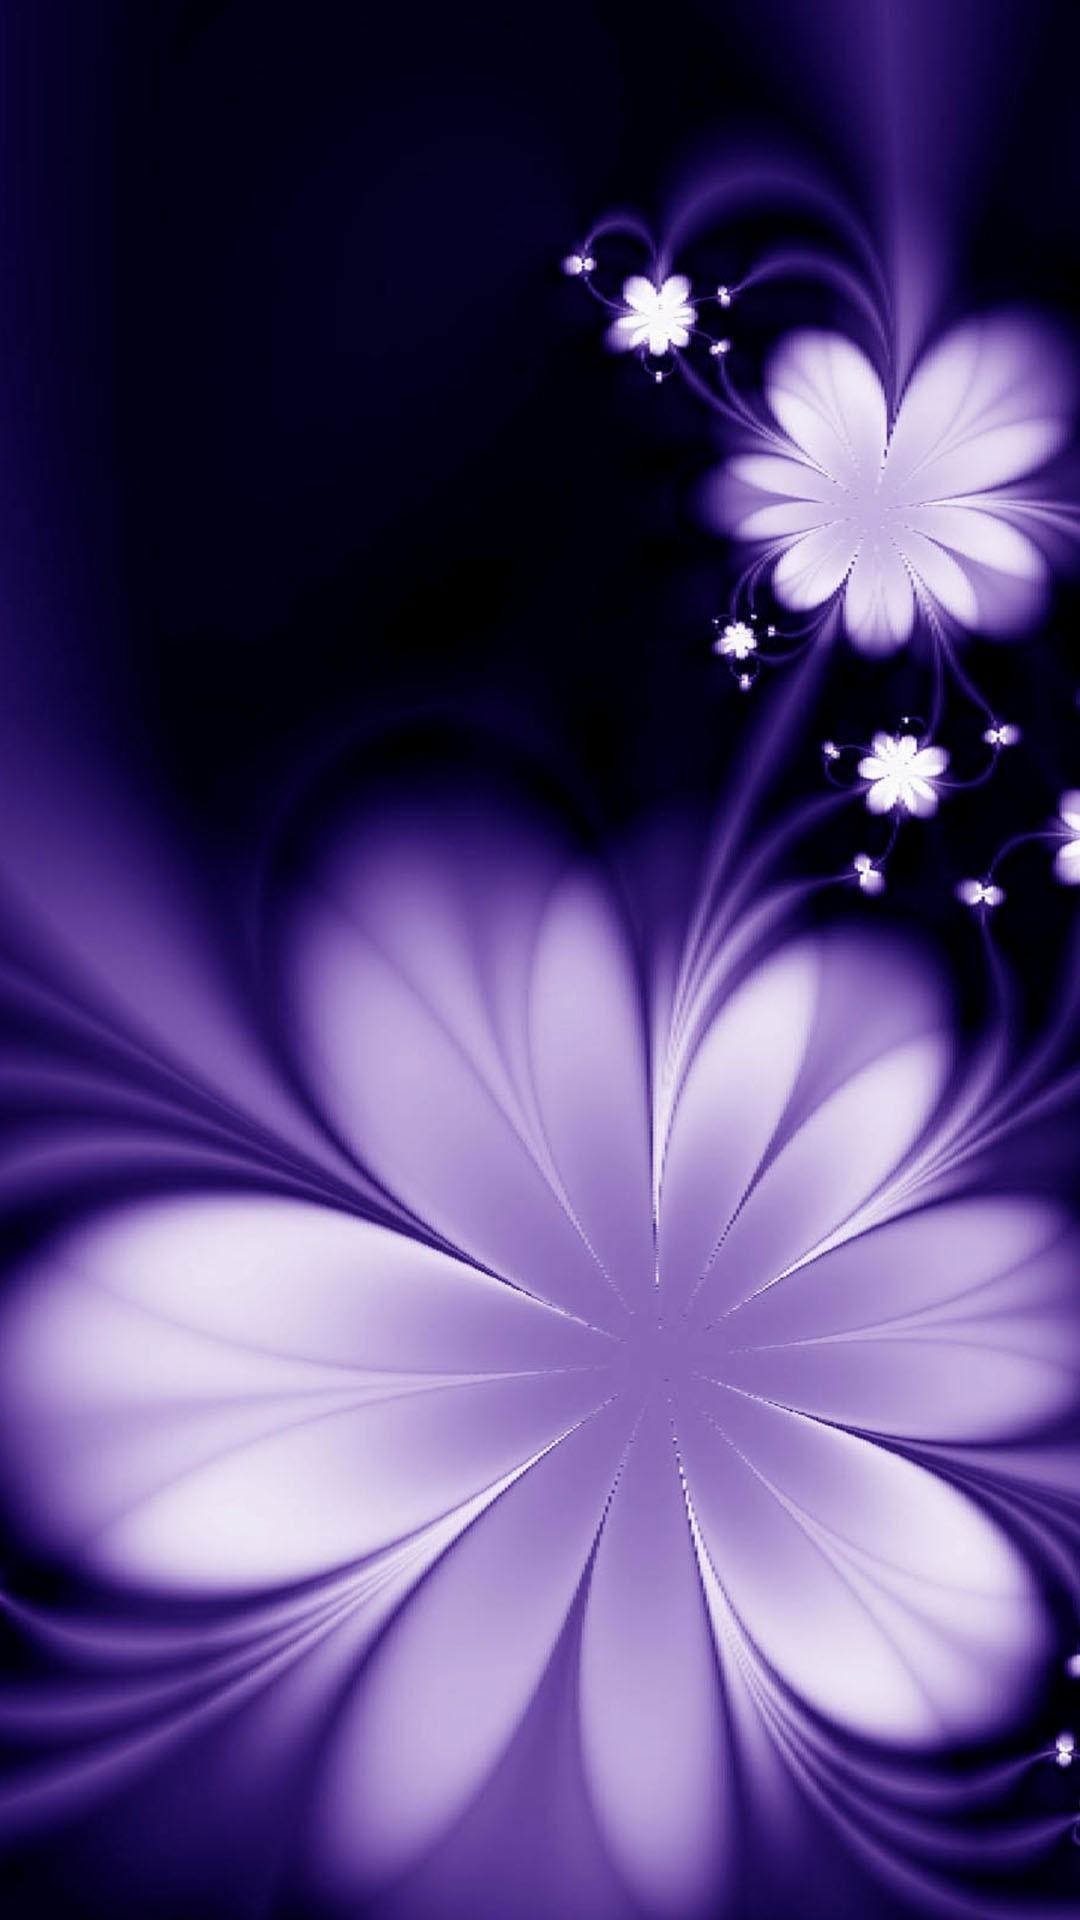 1080x1920 Artistic-Beautiful-Flower-Patterns-HD-1080p-Mobile-Background-